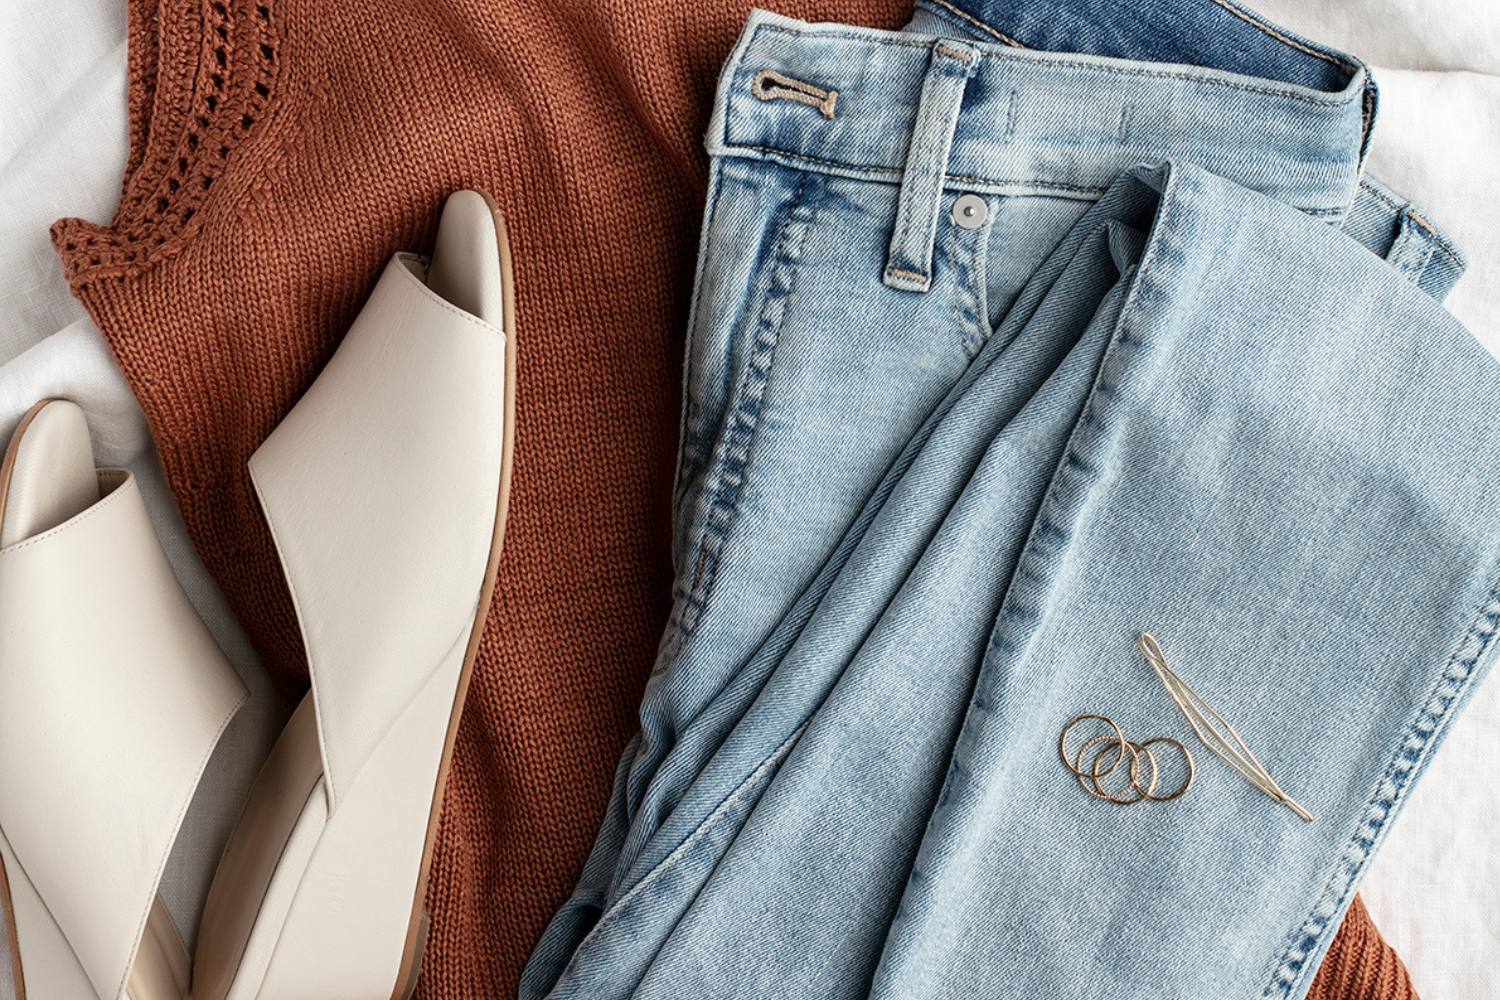 shirt, mule shoe, jeans, earrings and a bobby pin, folded